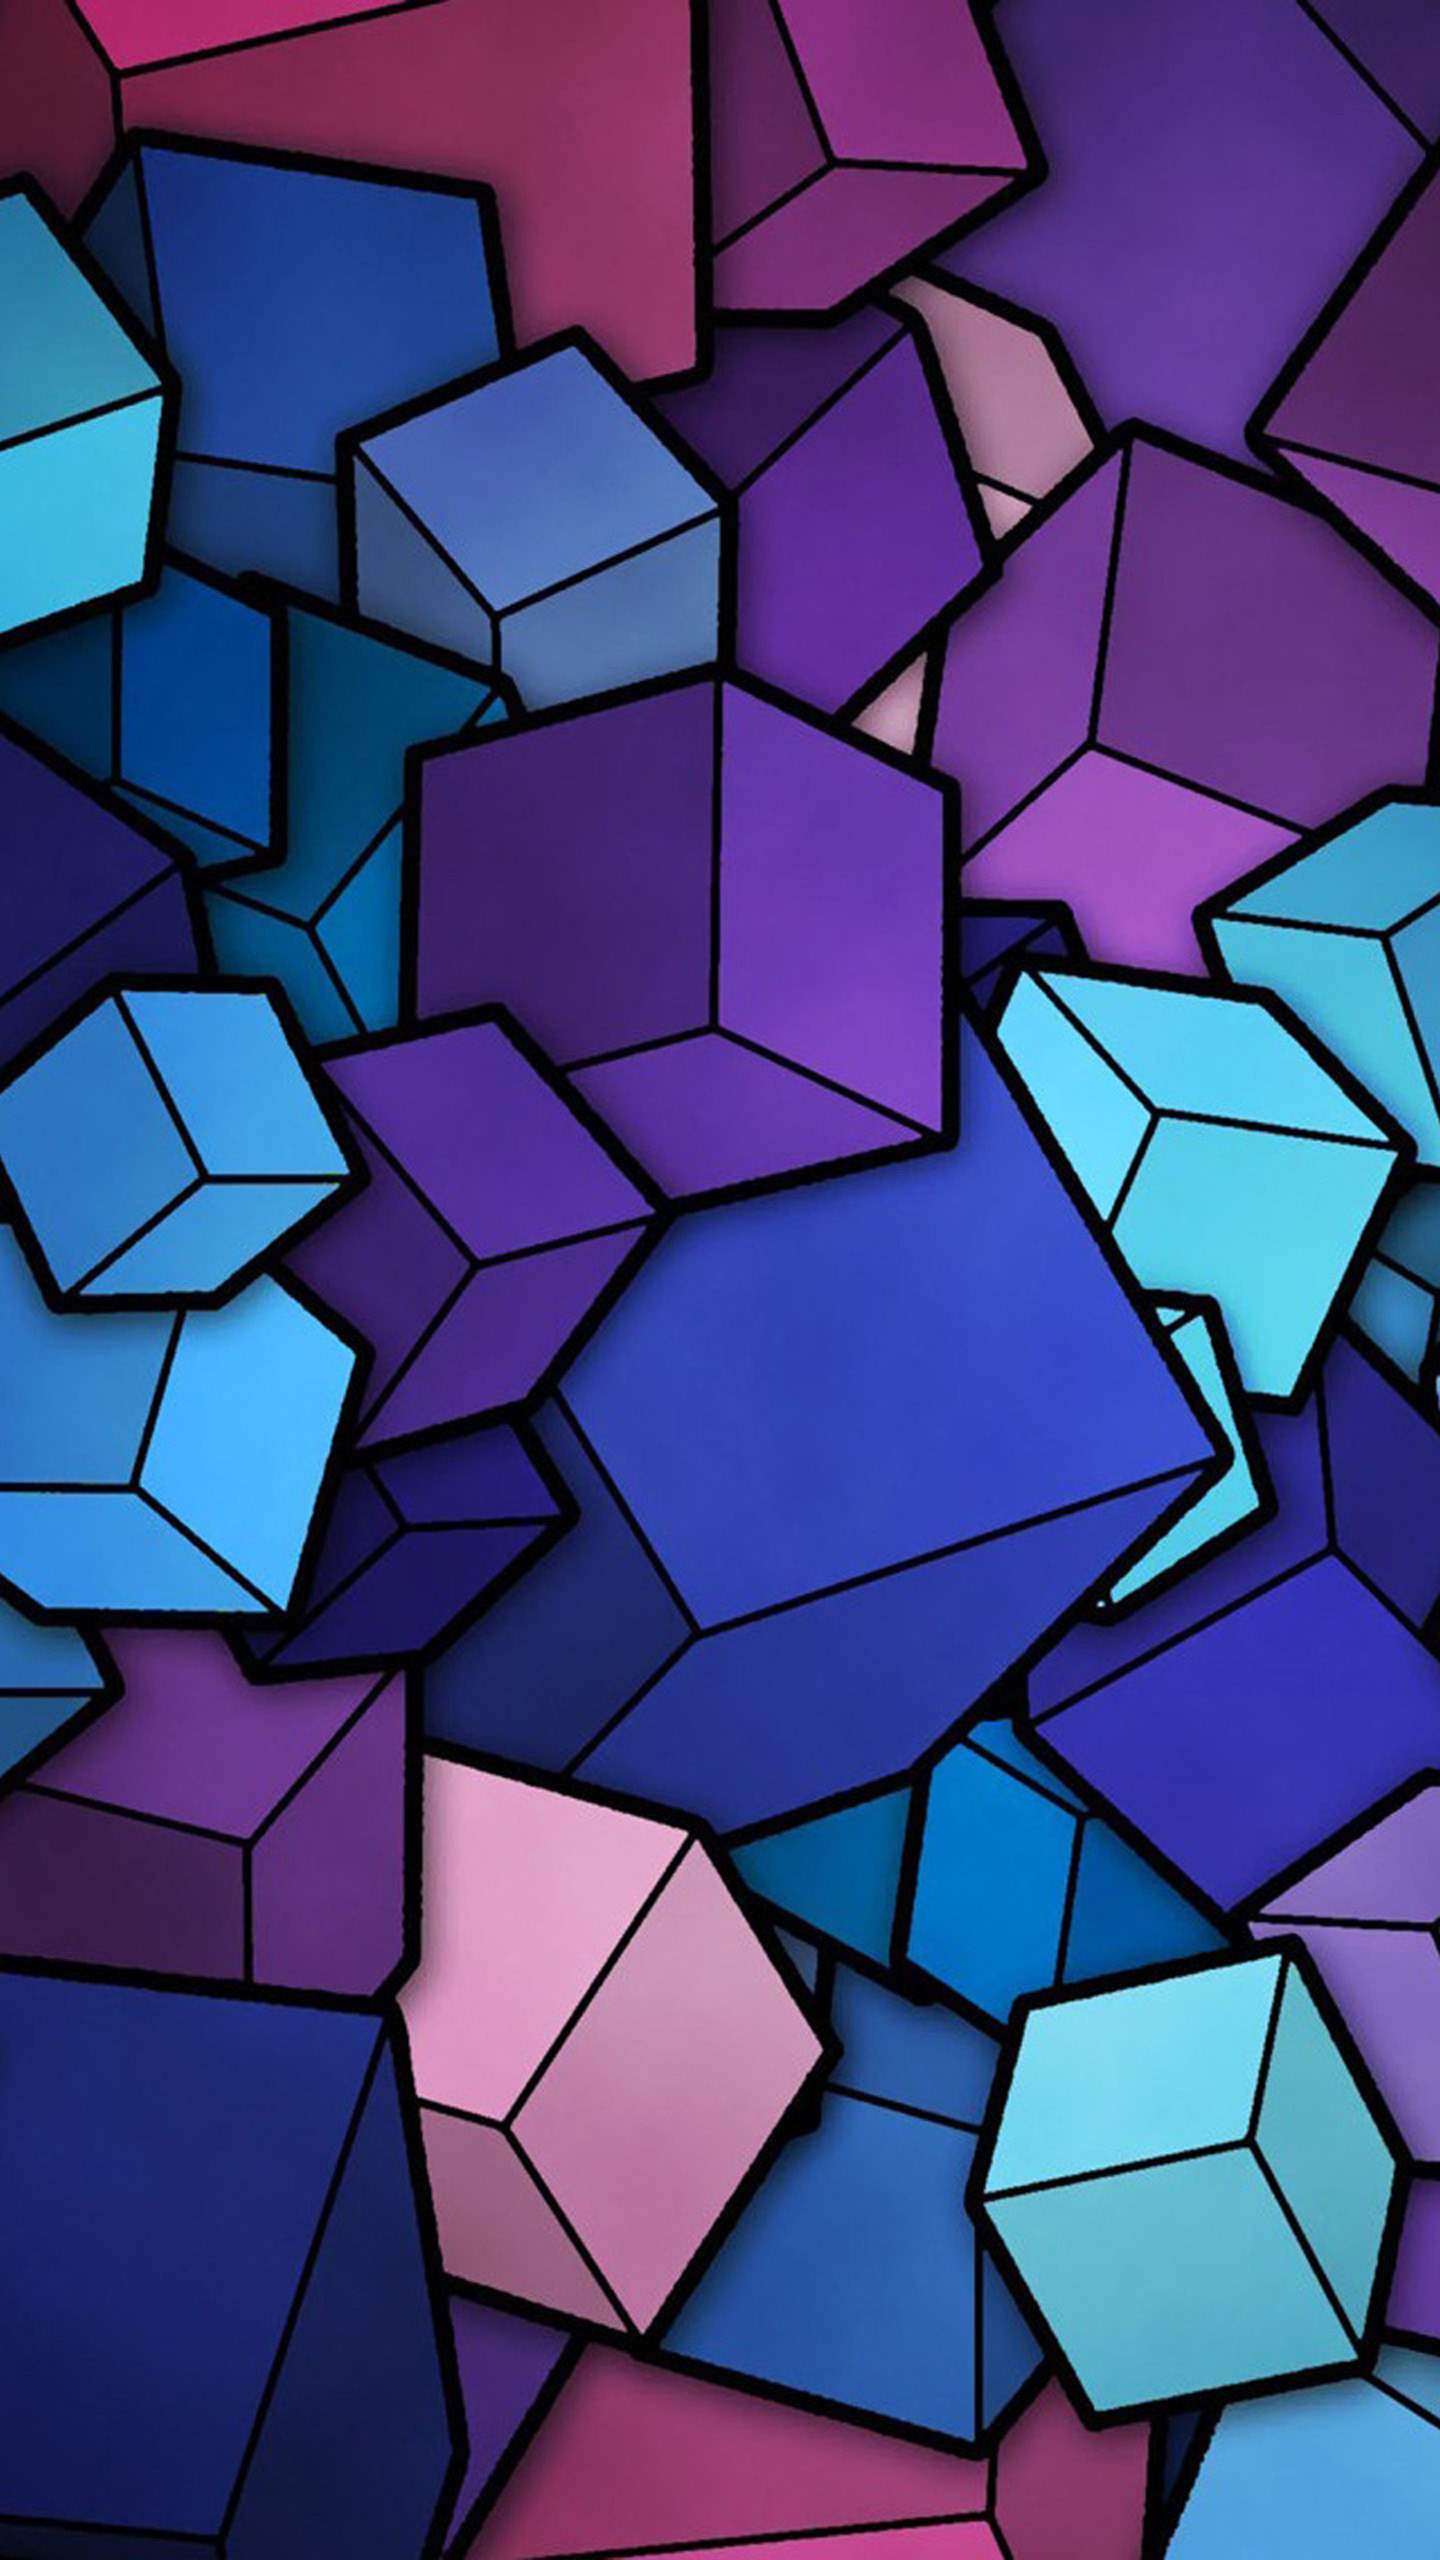 Posted about this last week. Here is the Cube wallpaper from MKBHDs Galaxy Note 10 video. Enjoy!